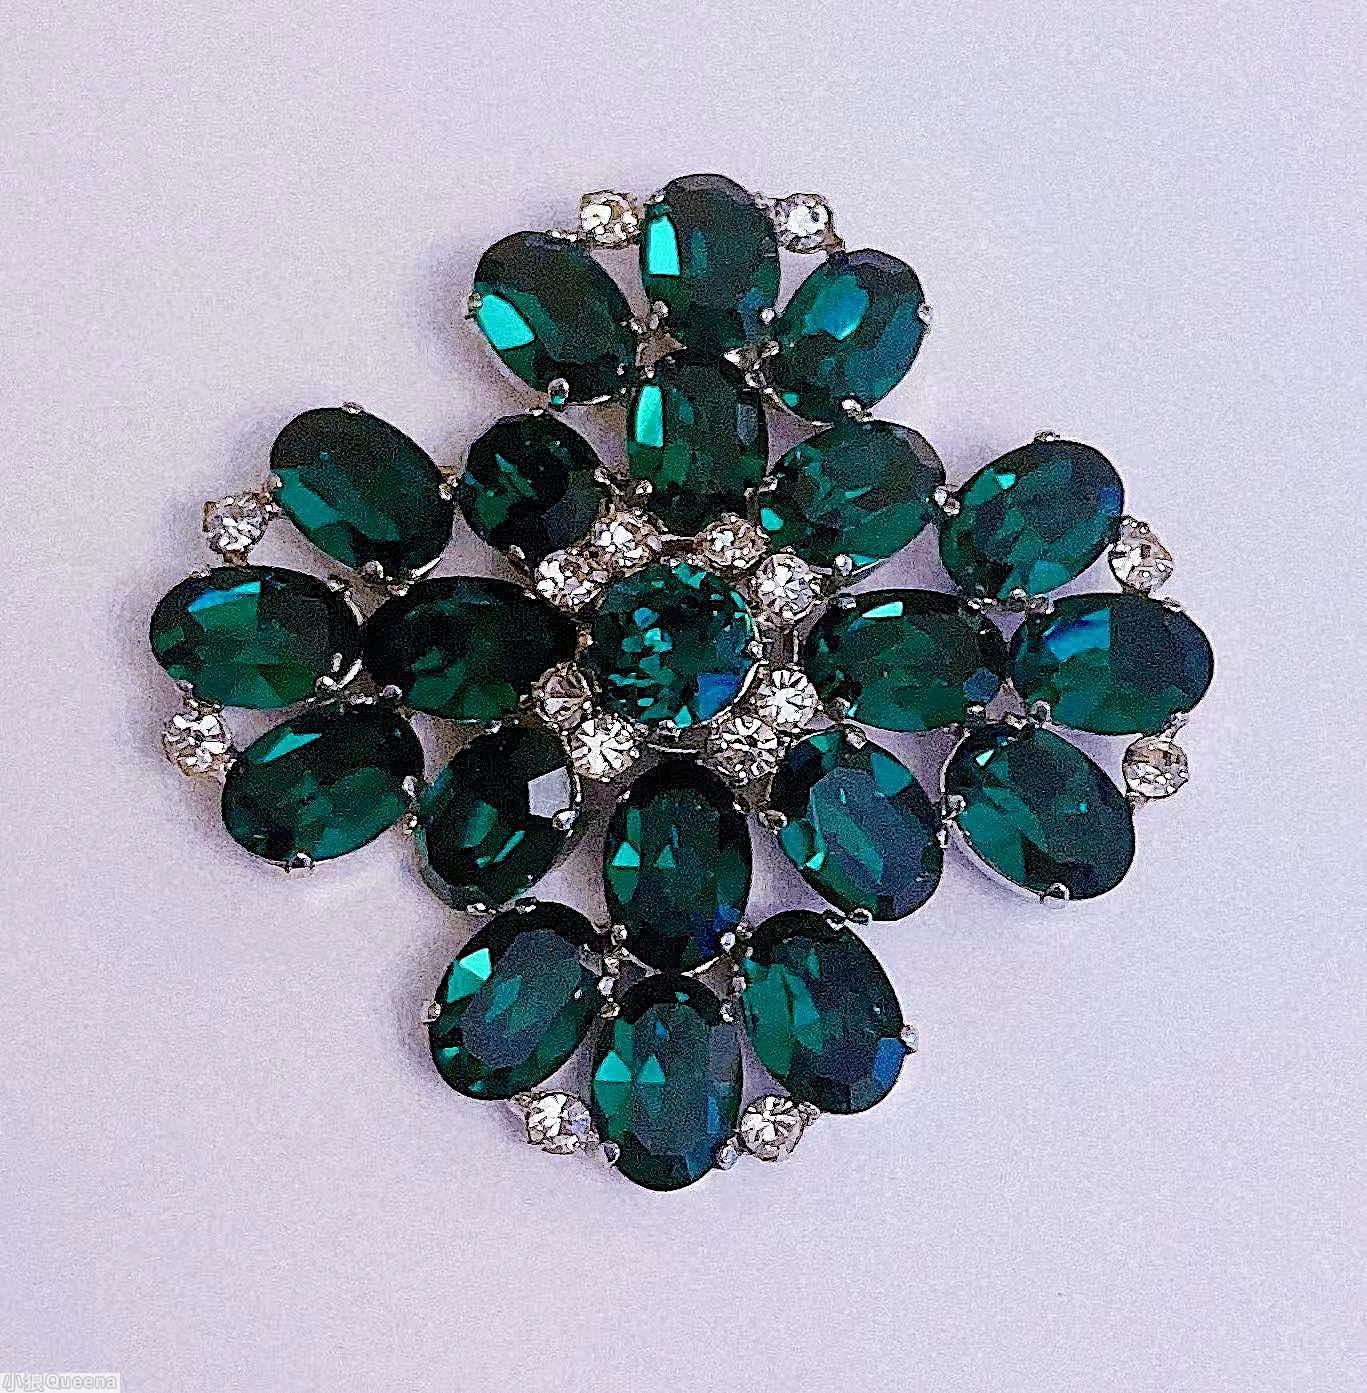 Schreiner square shaped radial pin 2 round 20 oval faceted stone 8 small surrounding chaton chaton center oval faceted emerald small crystal chaton silvertone jewelry